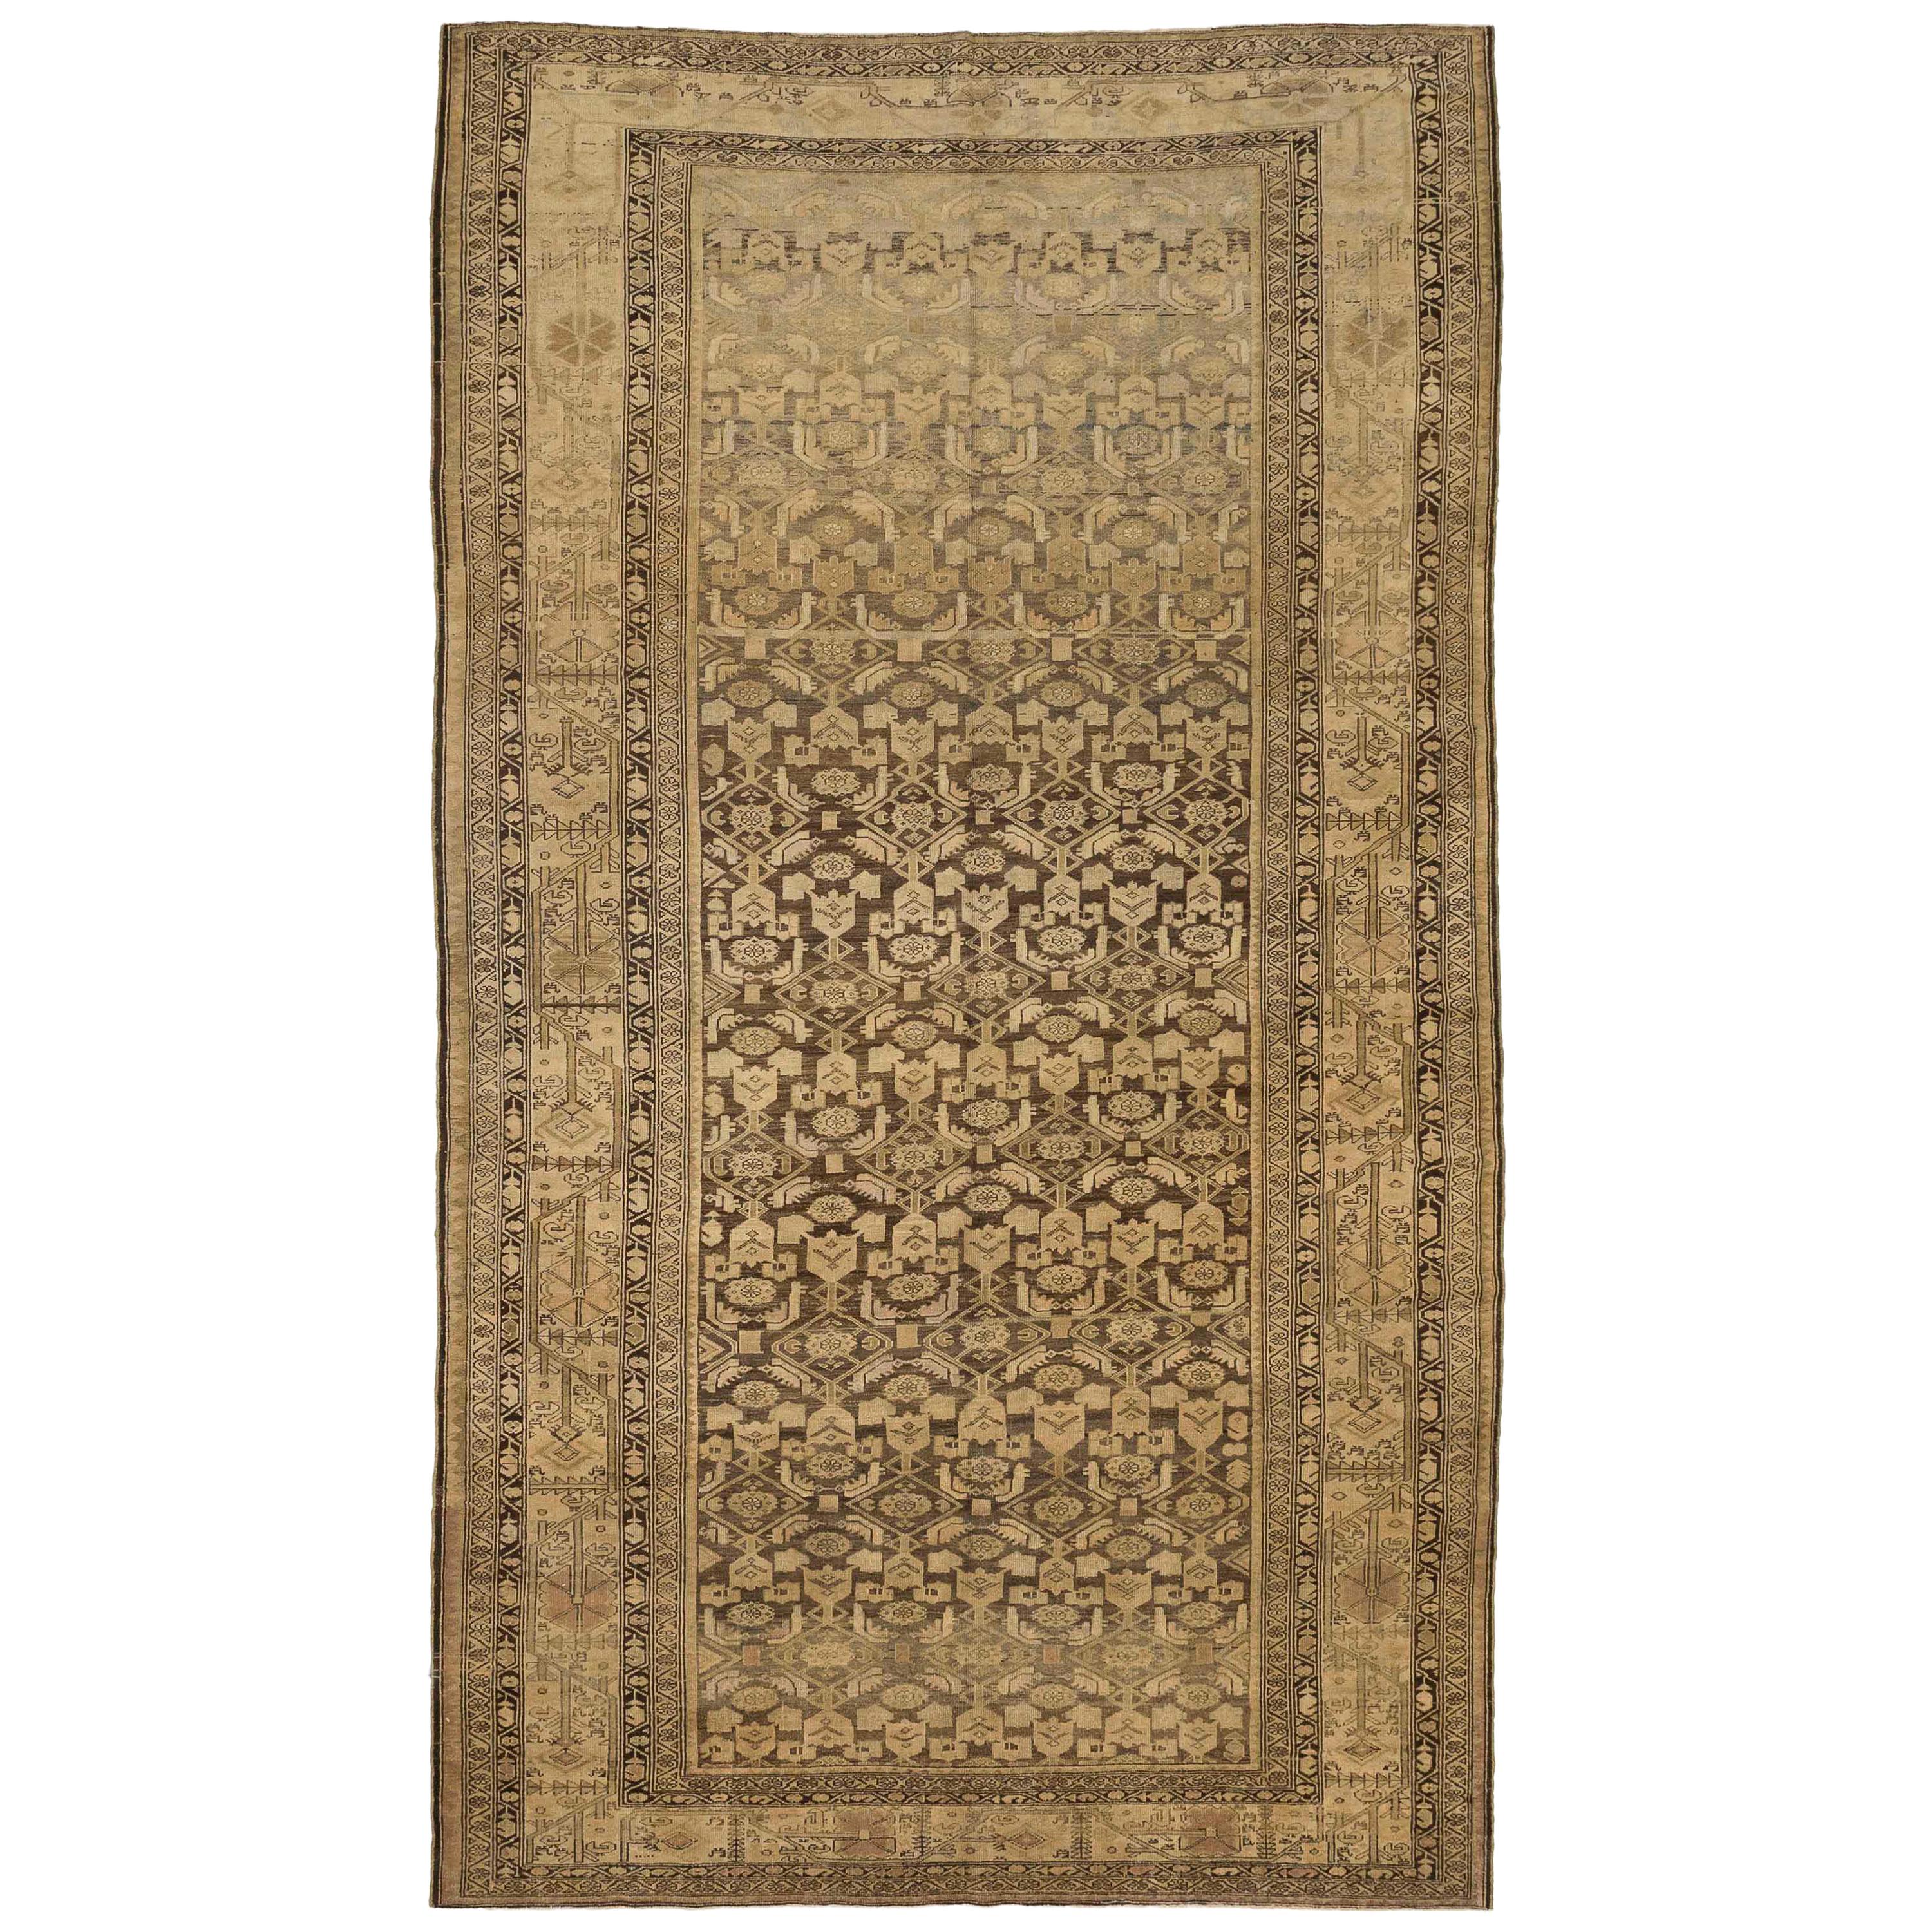 Persian Rug Malayer Style with Beige & Brown Design Patterns, circa 1930s For Sale